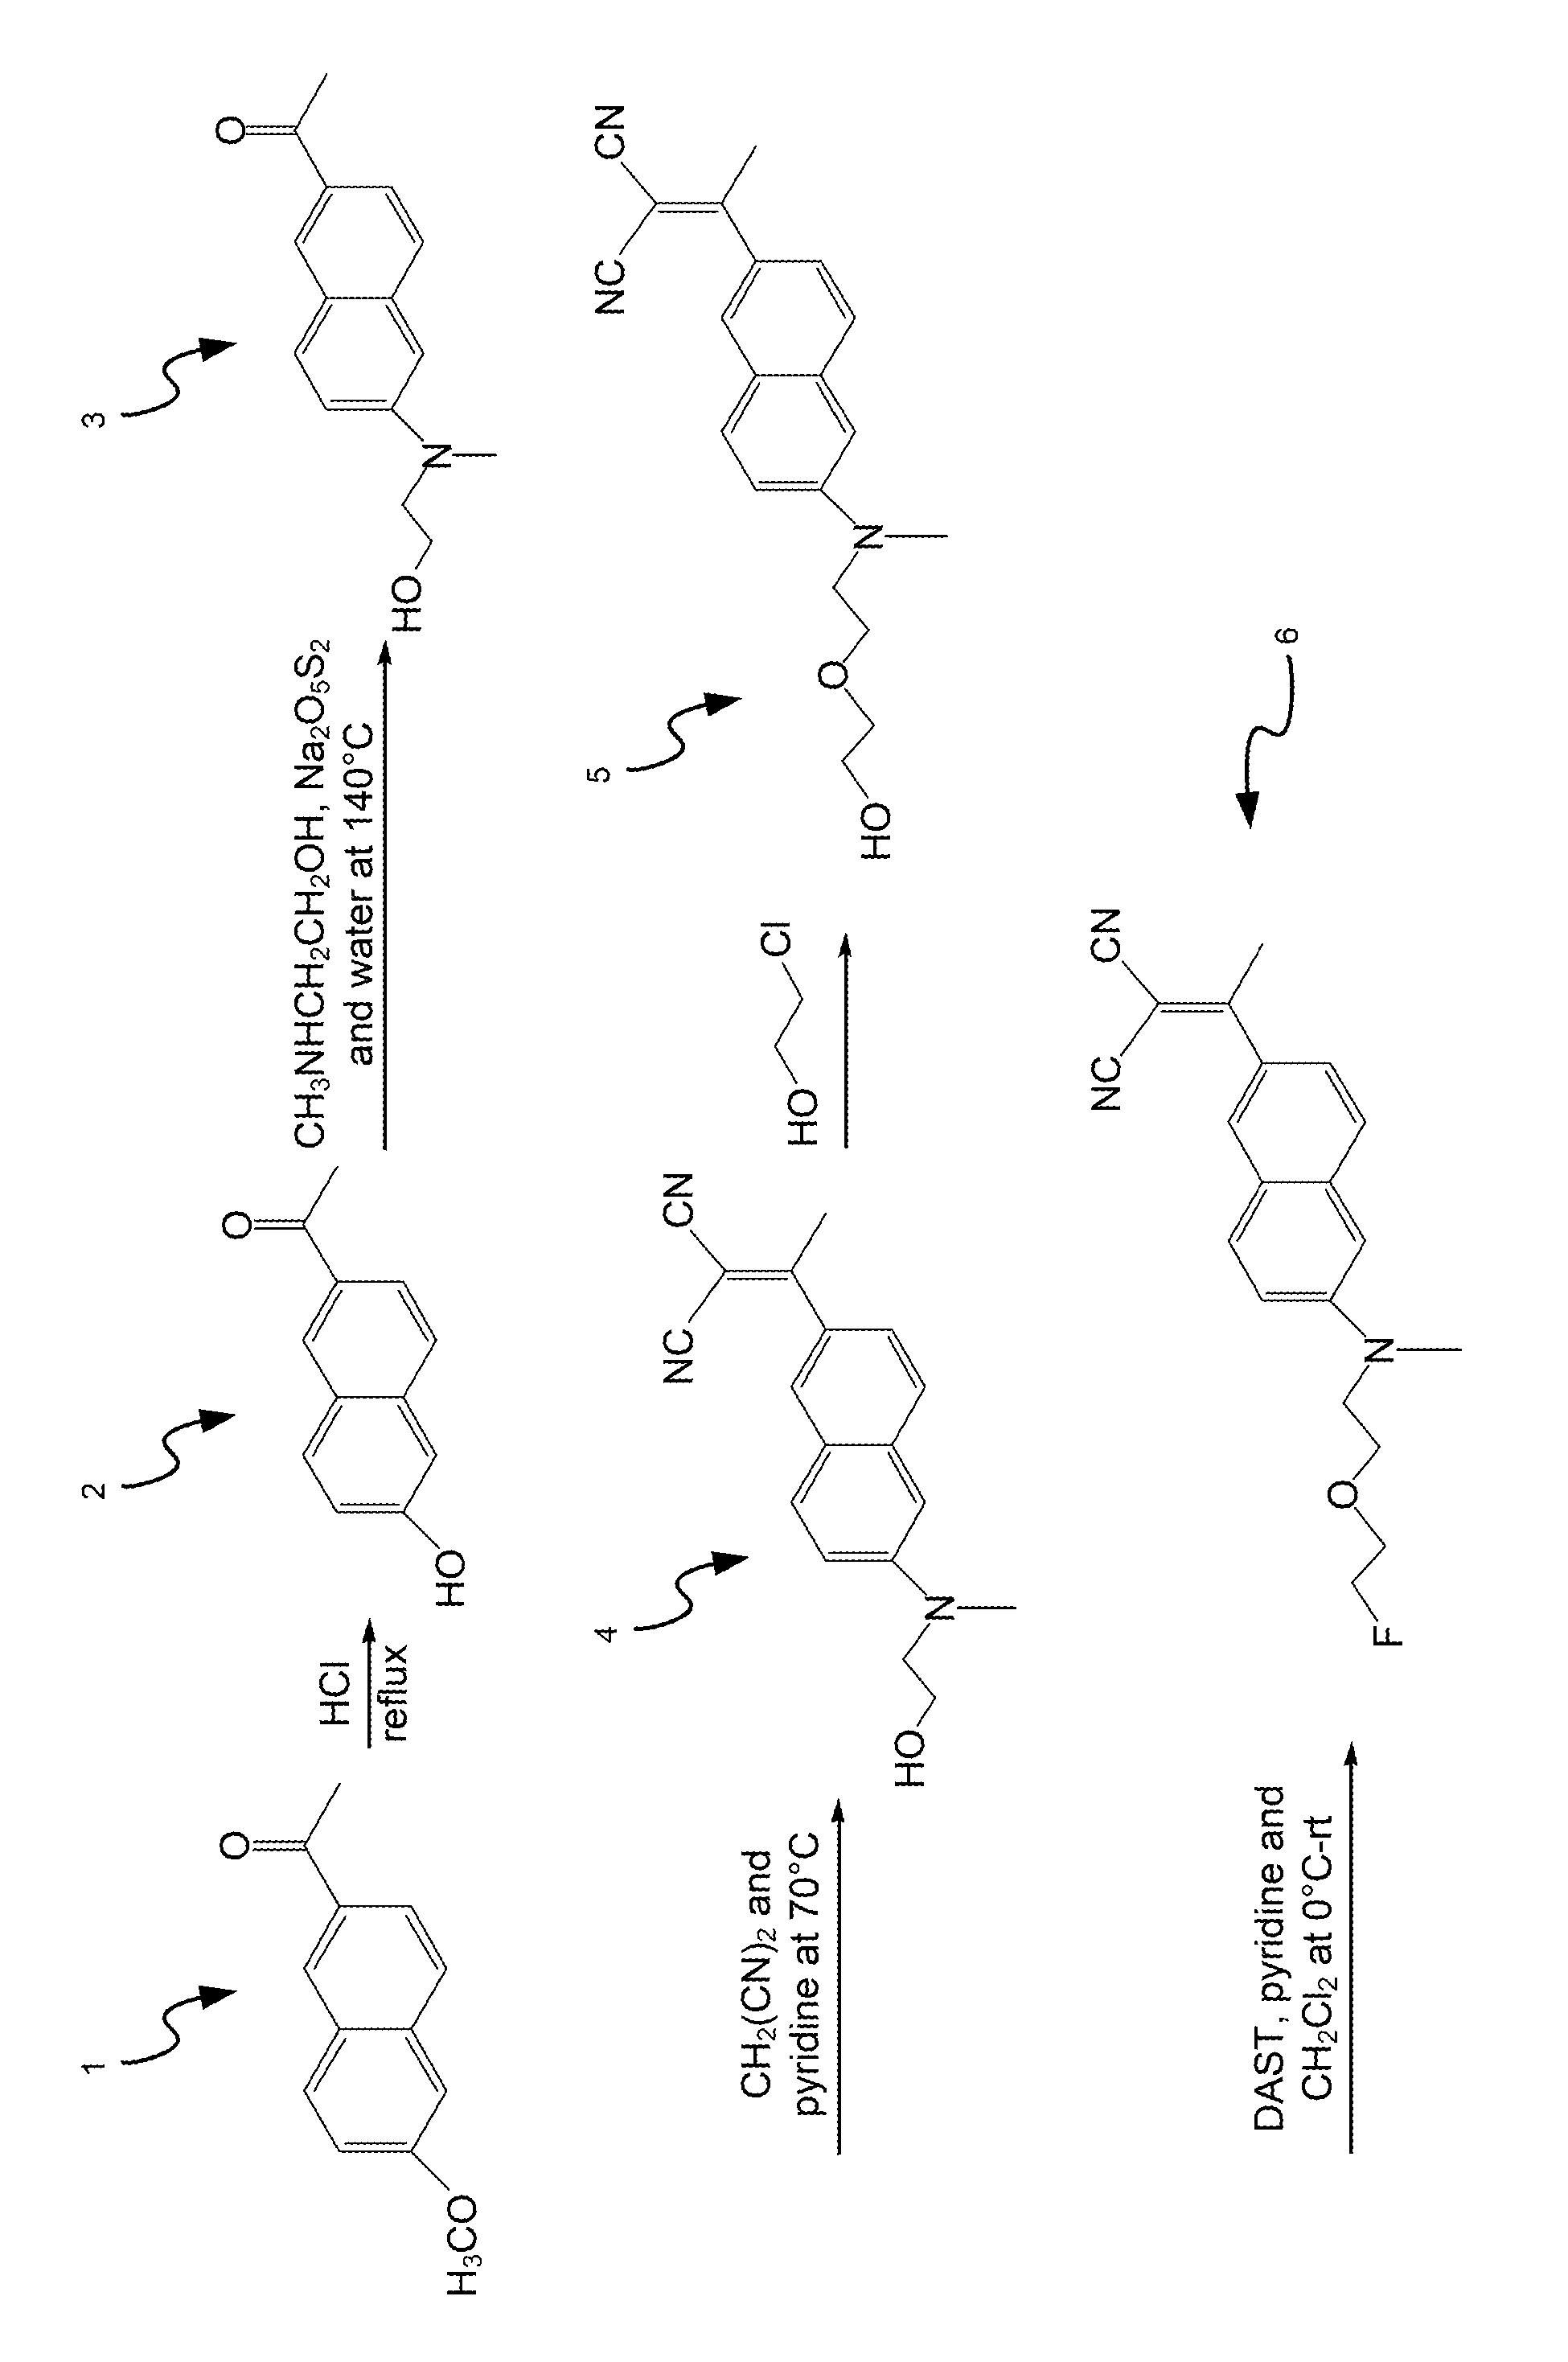 Compound of radiocontrast agent for tau protein